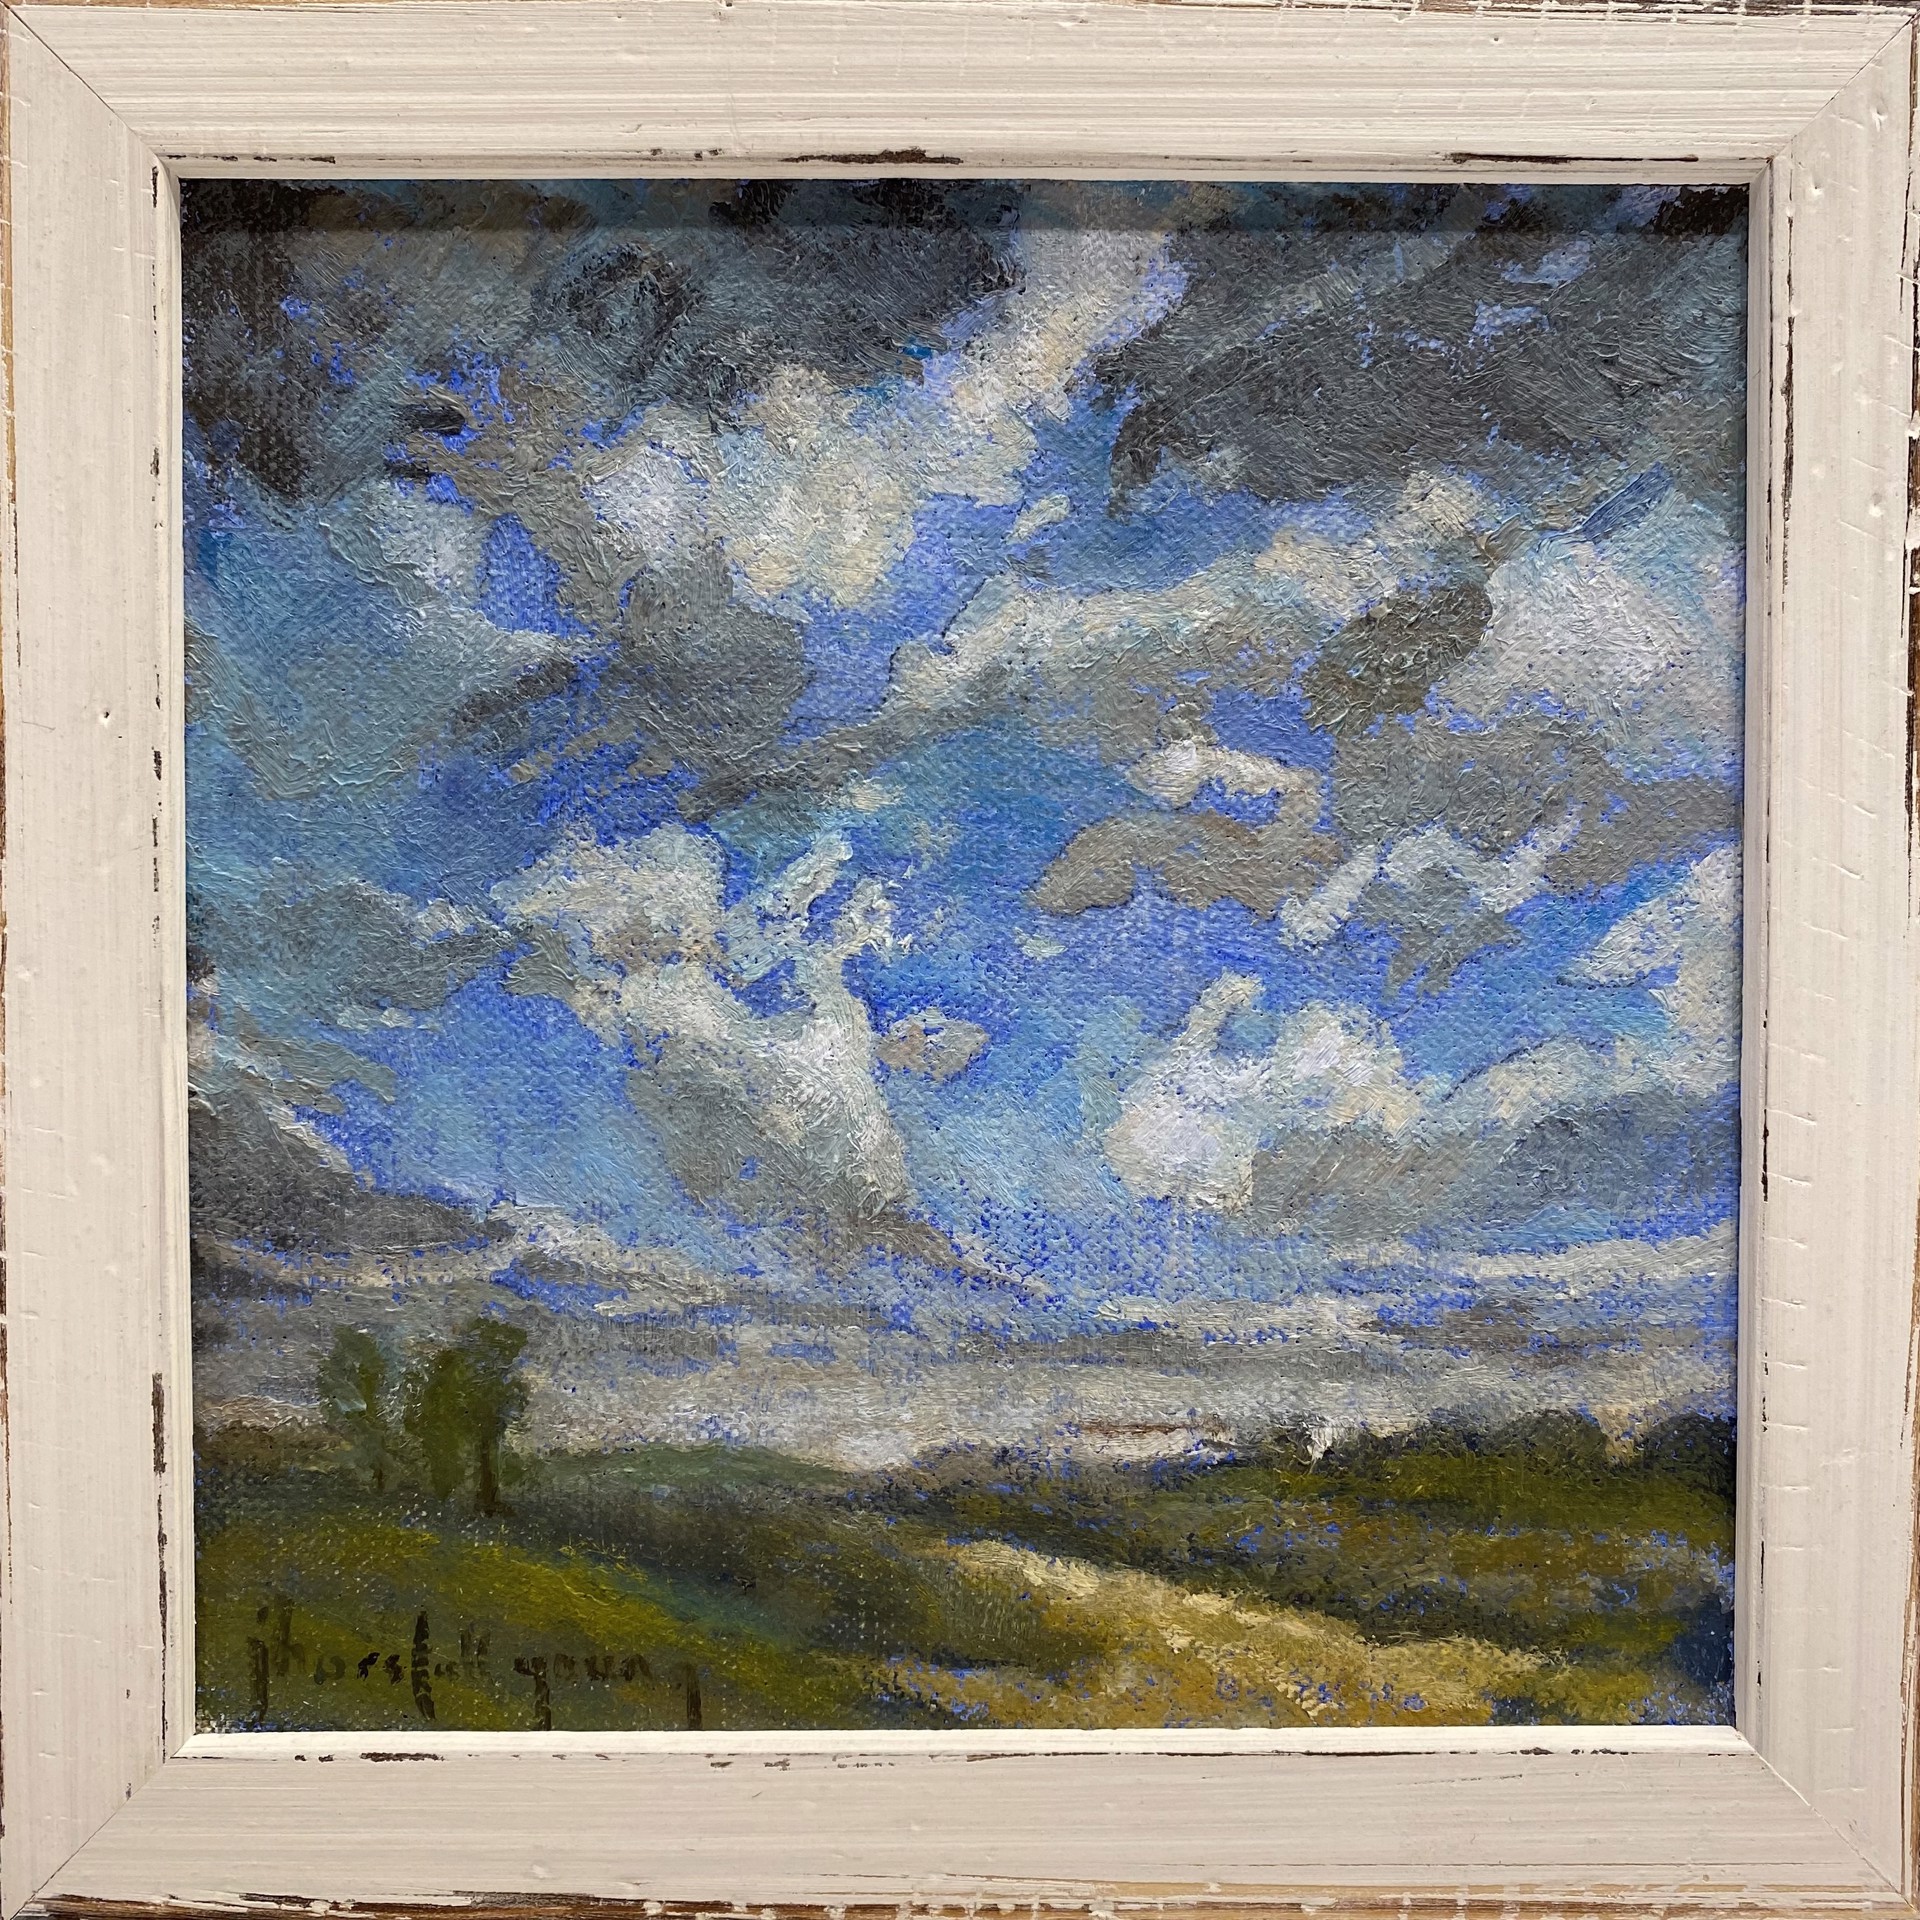 Clouds over Field (L615) by Joan Horsfall Young